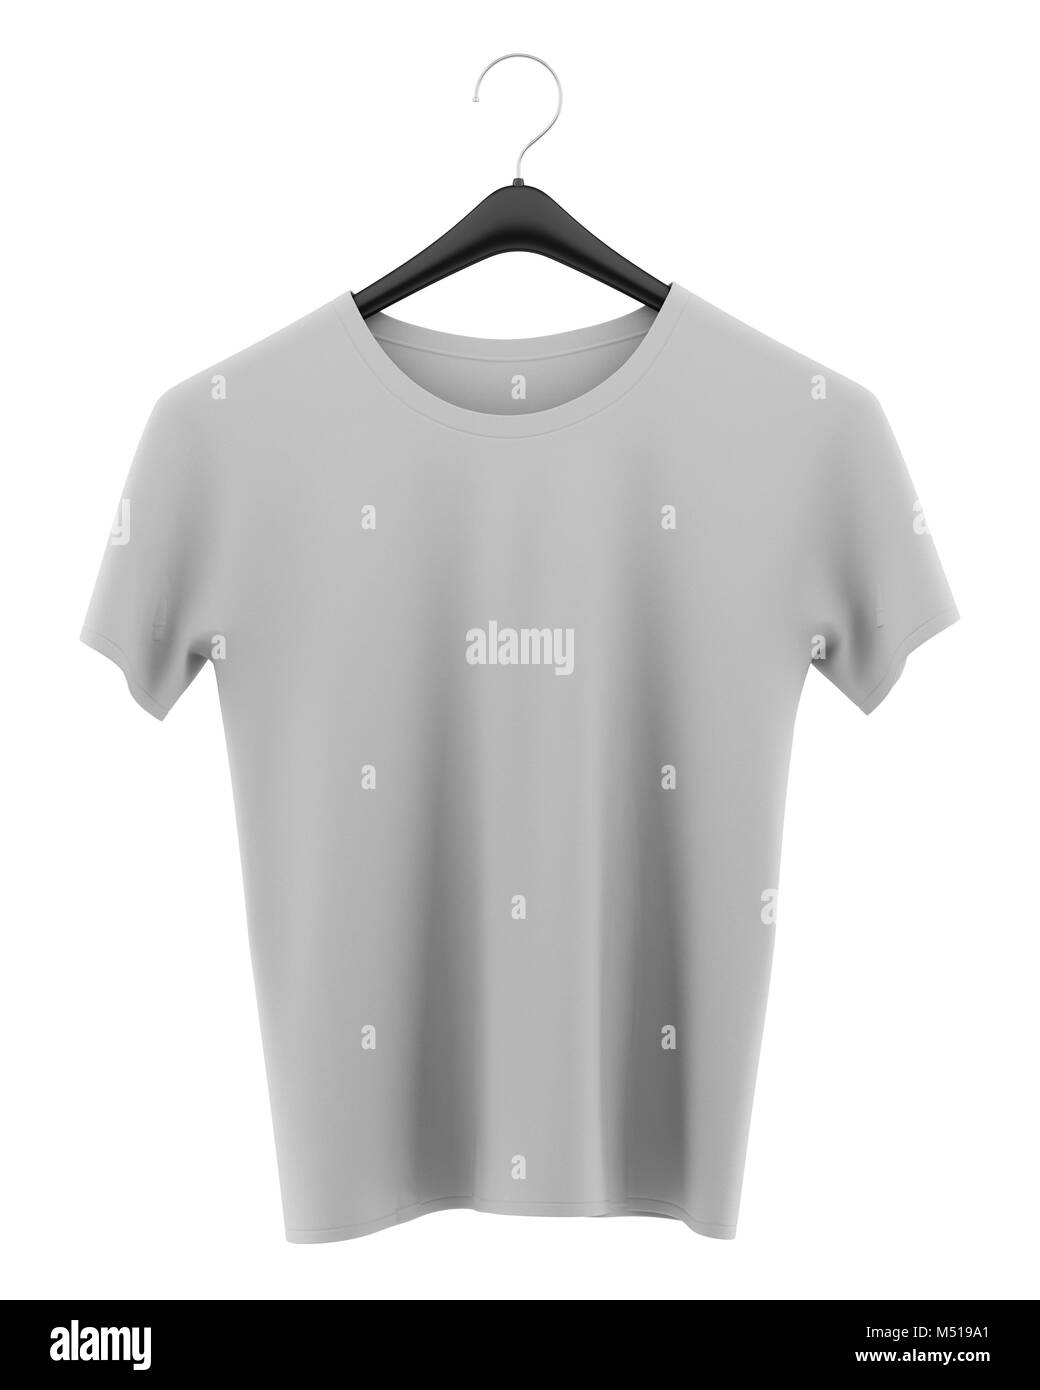 https://c8.alamy.com/comp/M519A1/gray-t-shirt-on-clothing-hanger-isolated-on-white-background-M519A1.jpg